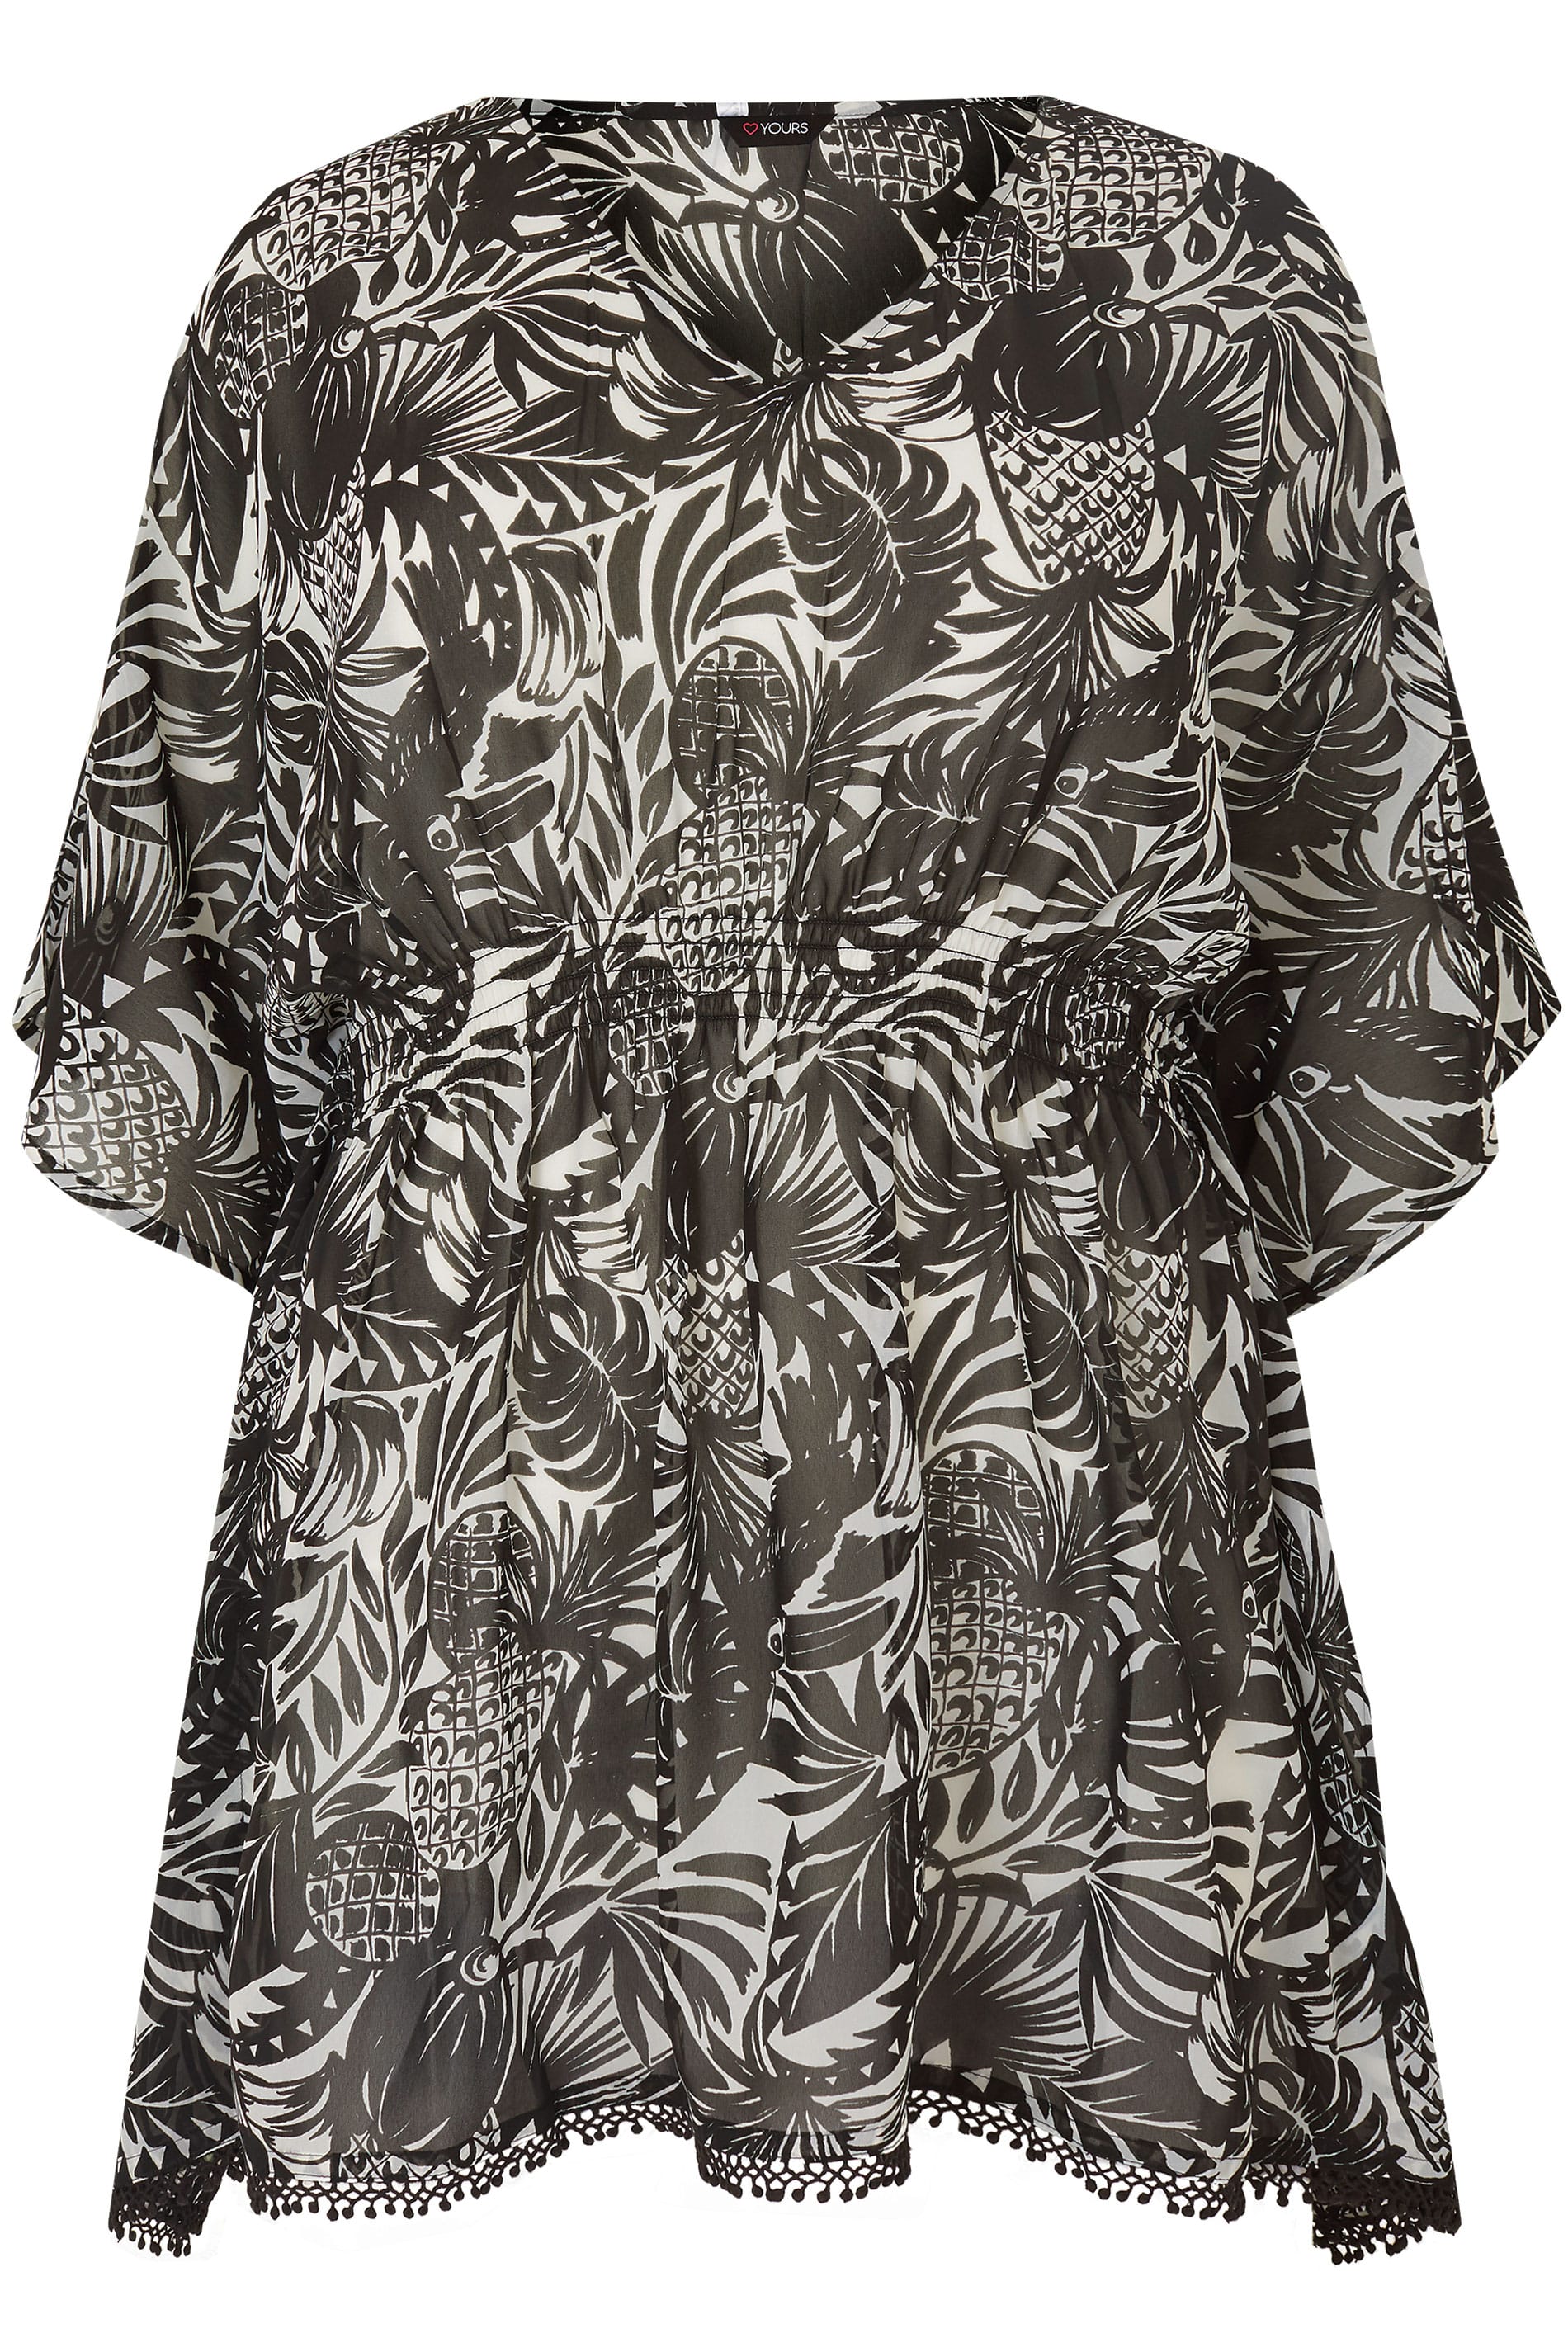 Black & White Tropical Print Cover-Up, plus size 16 to 36